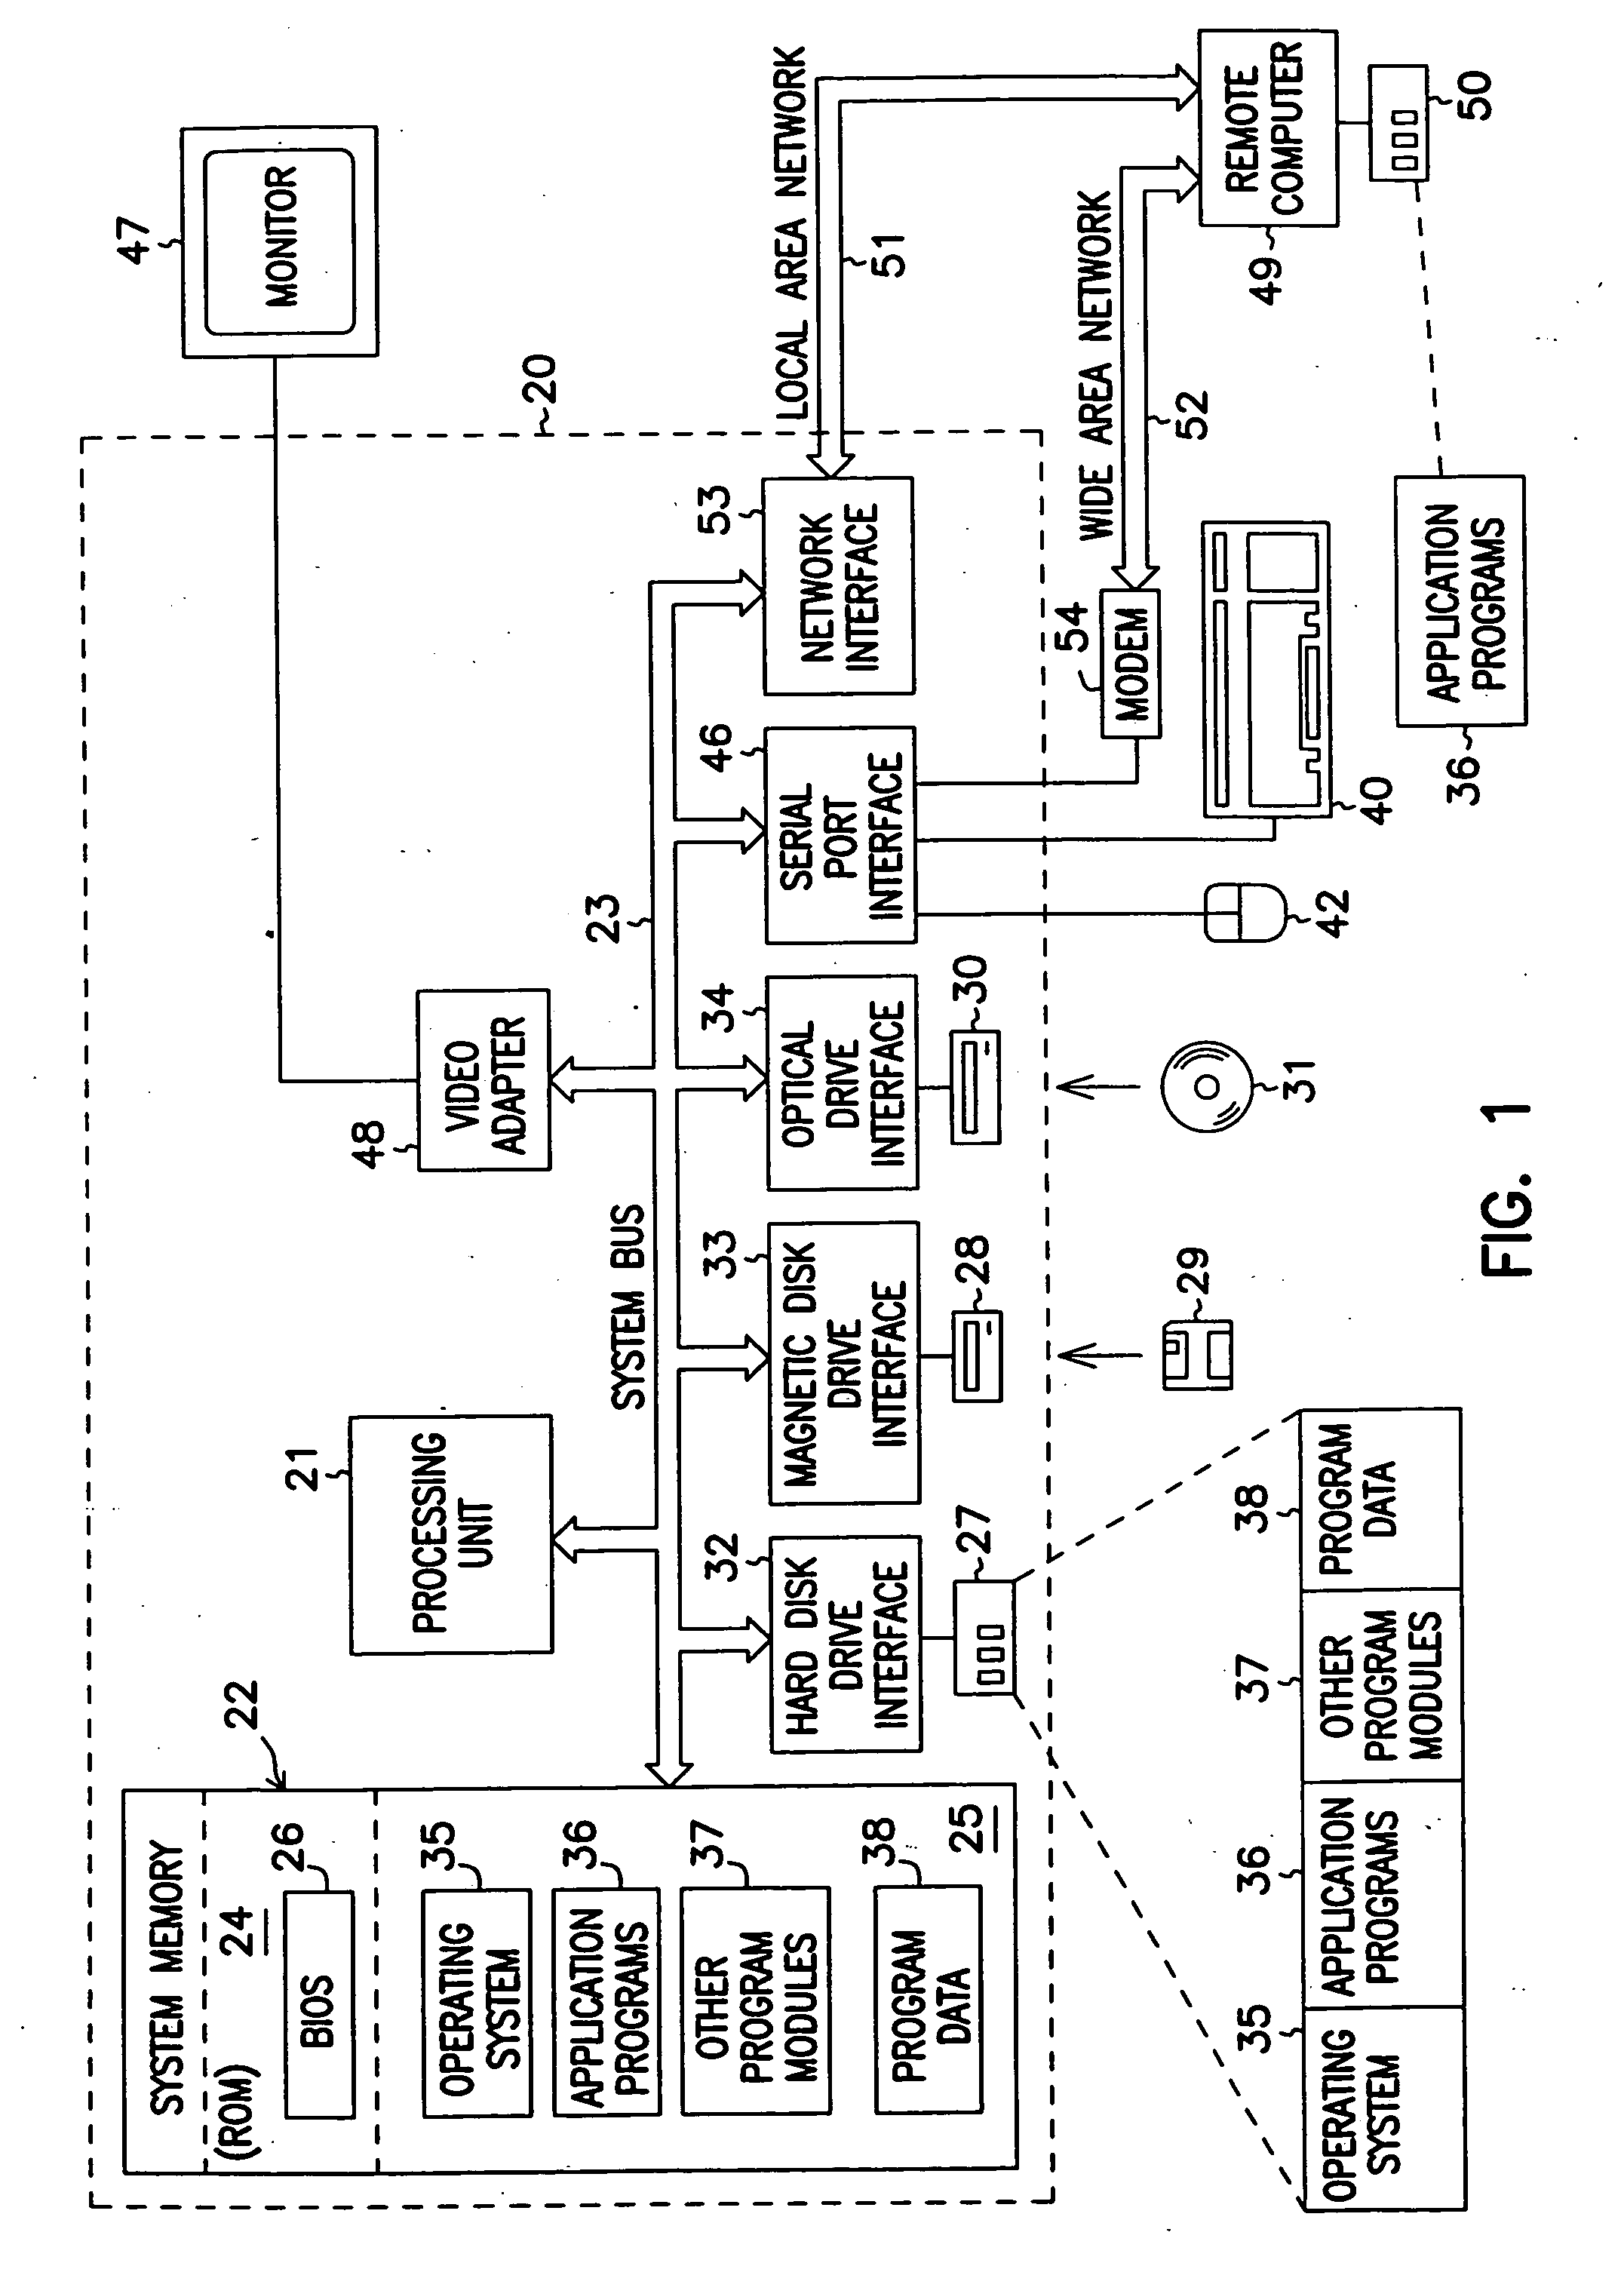 Scalable computing system for managing annotations